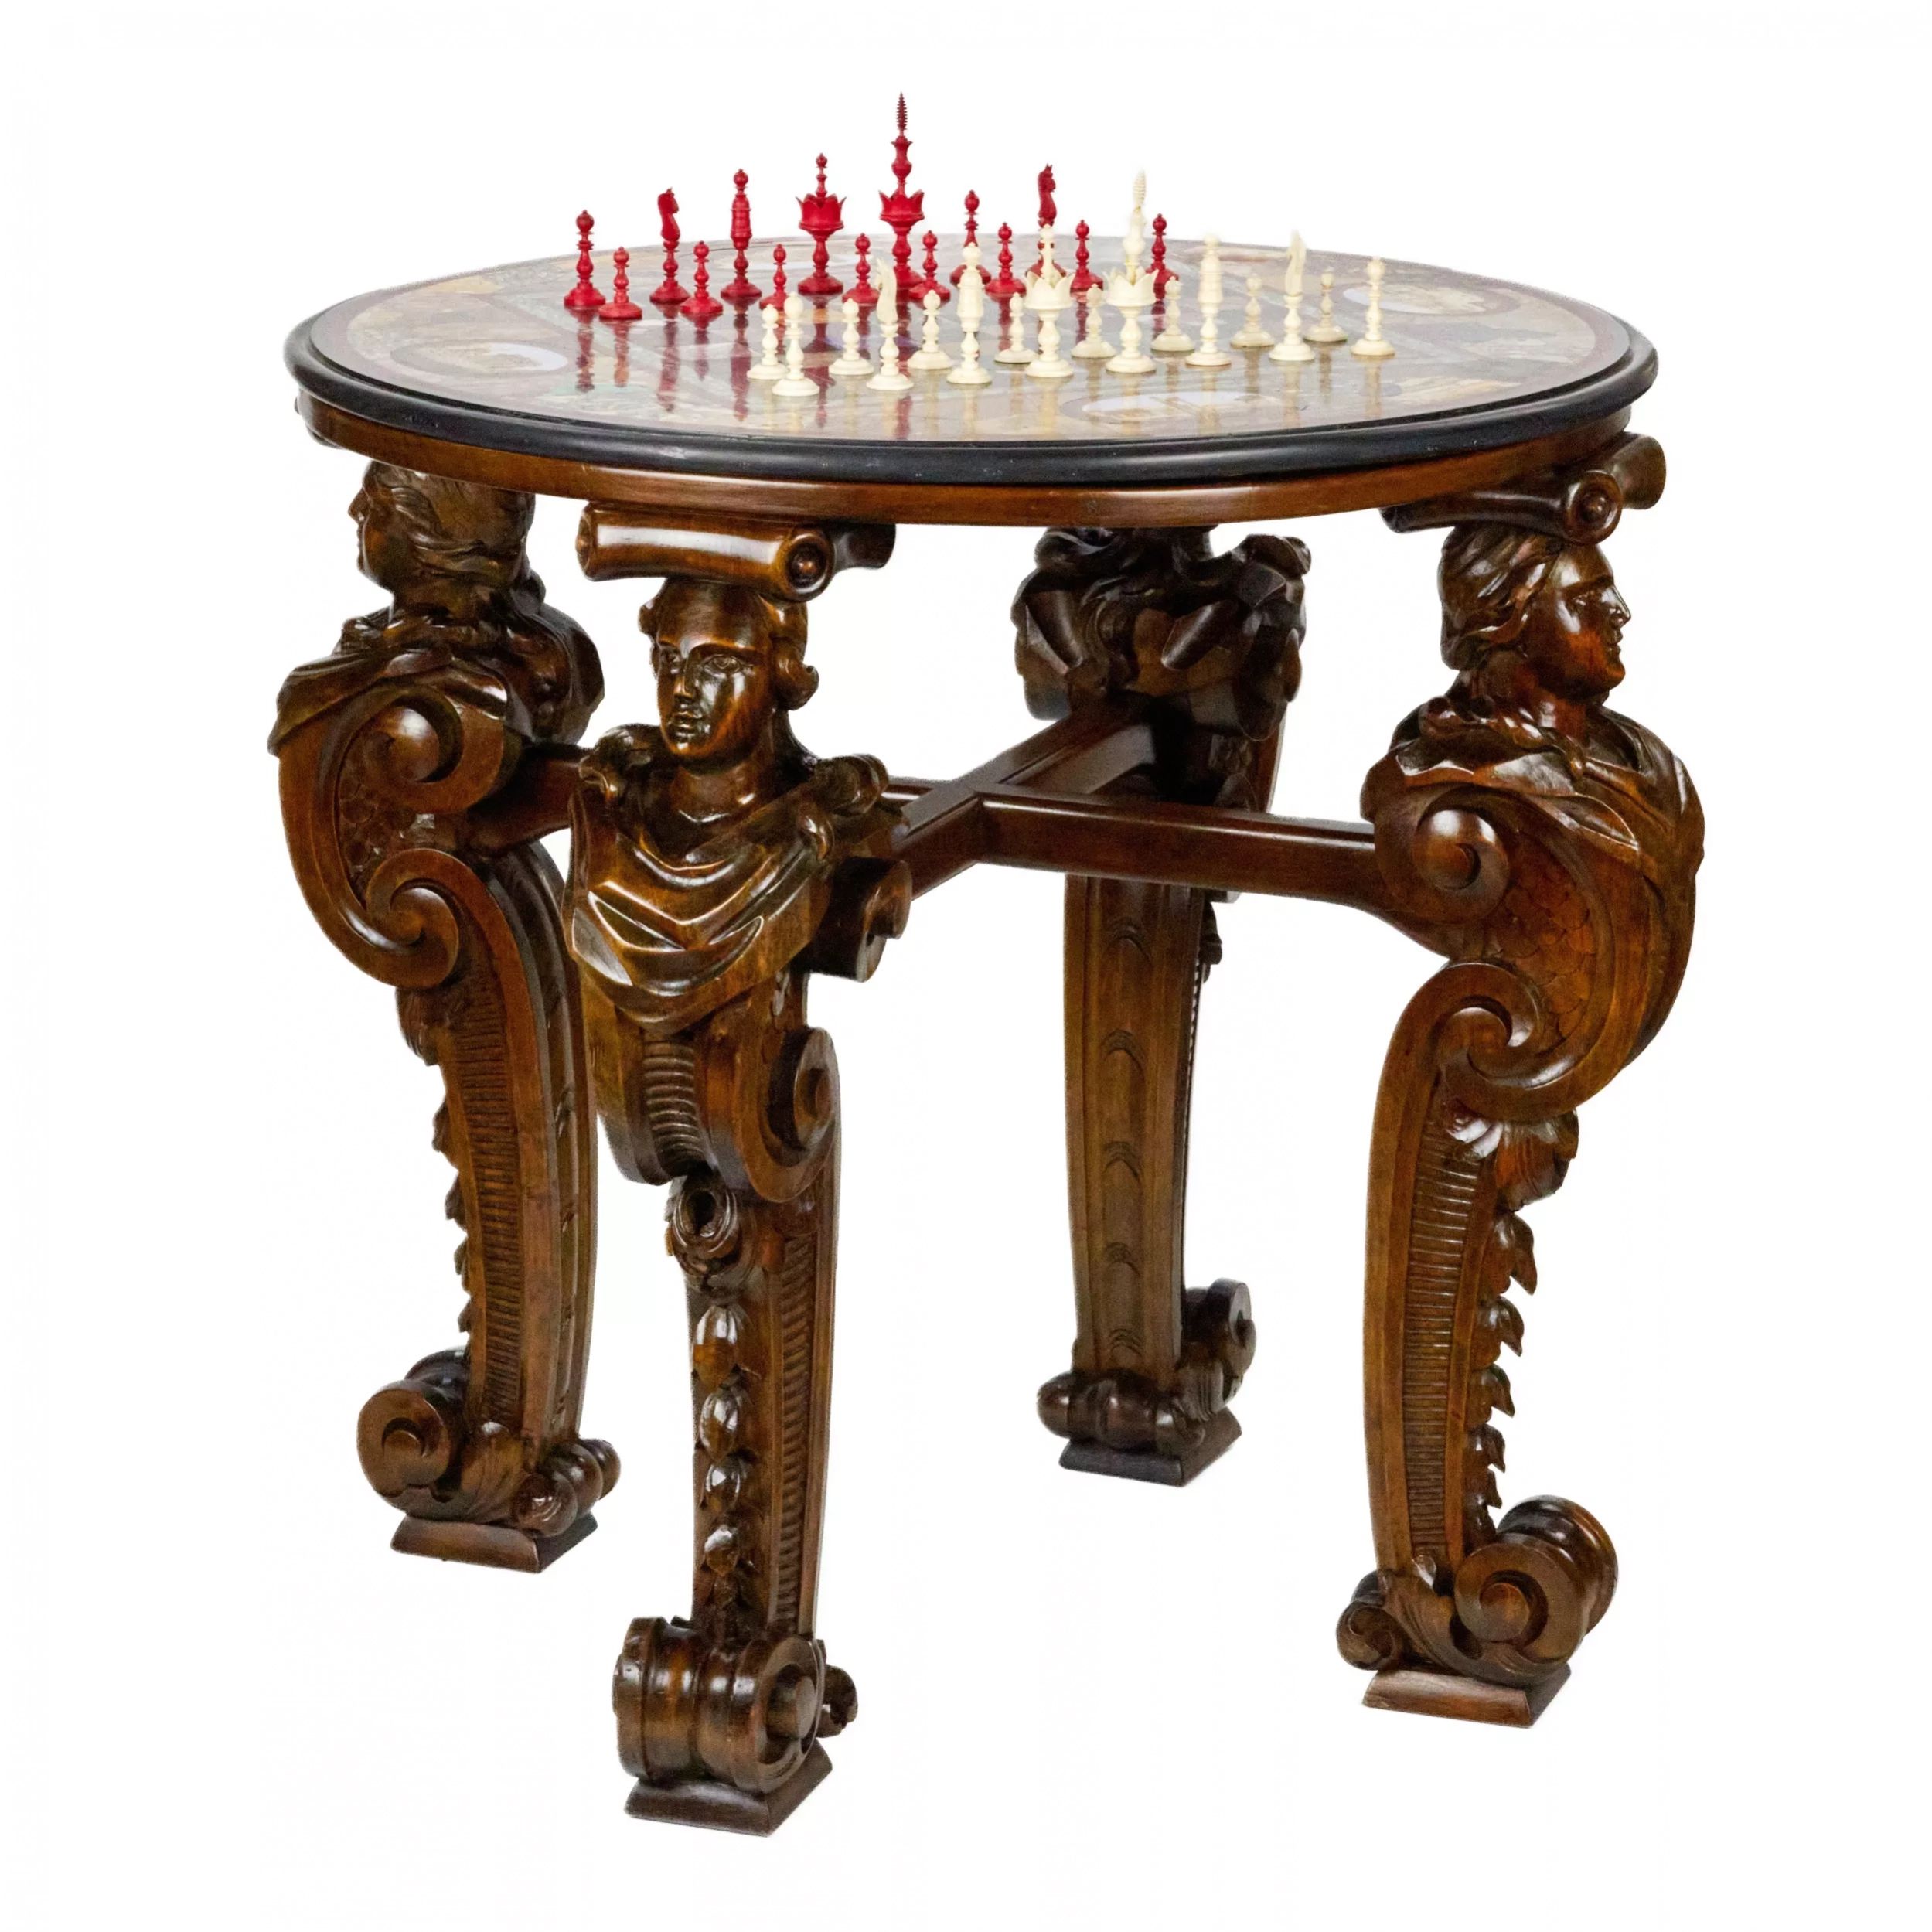 Impressive-chess-table-with-precious-Roman-mosaics-on-carved-legs-